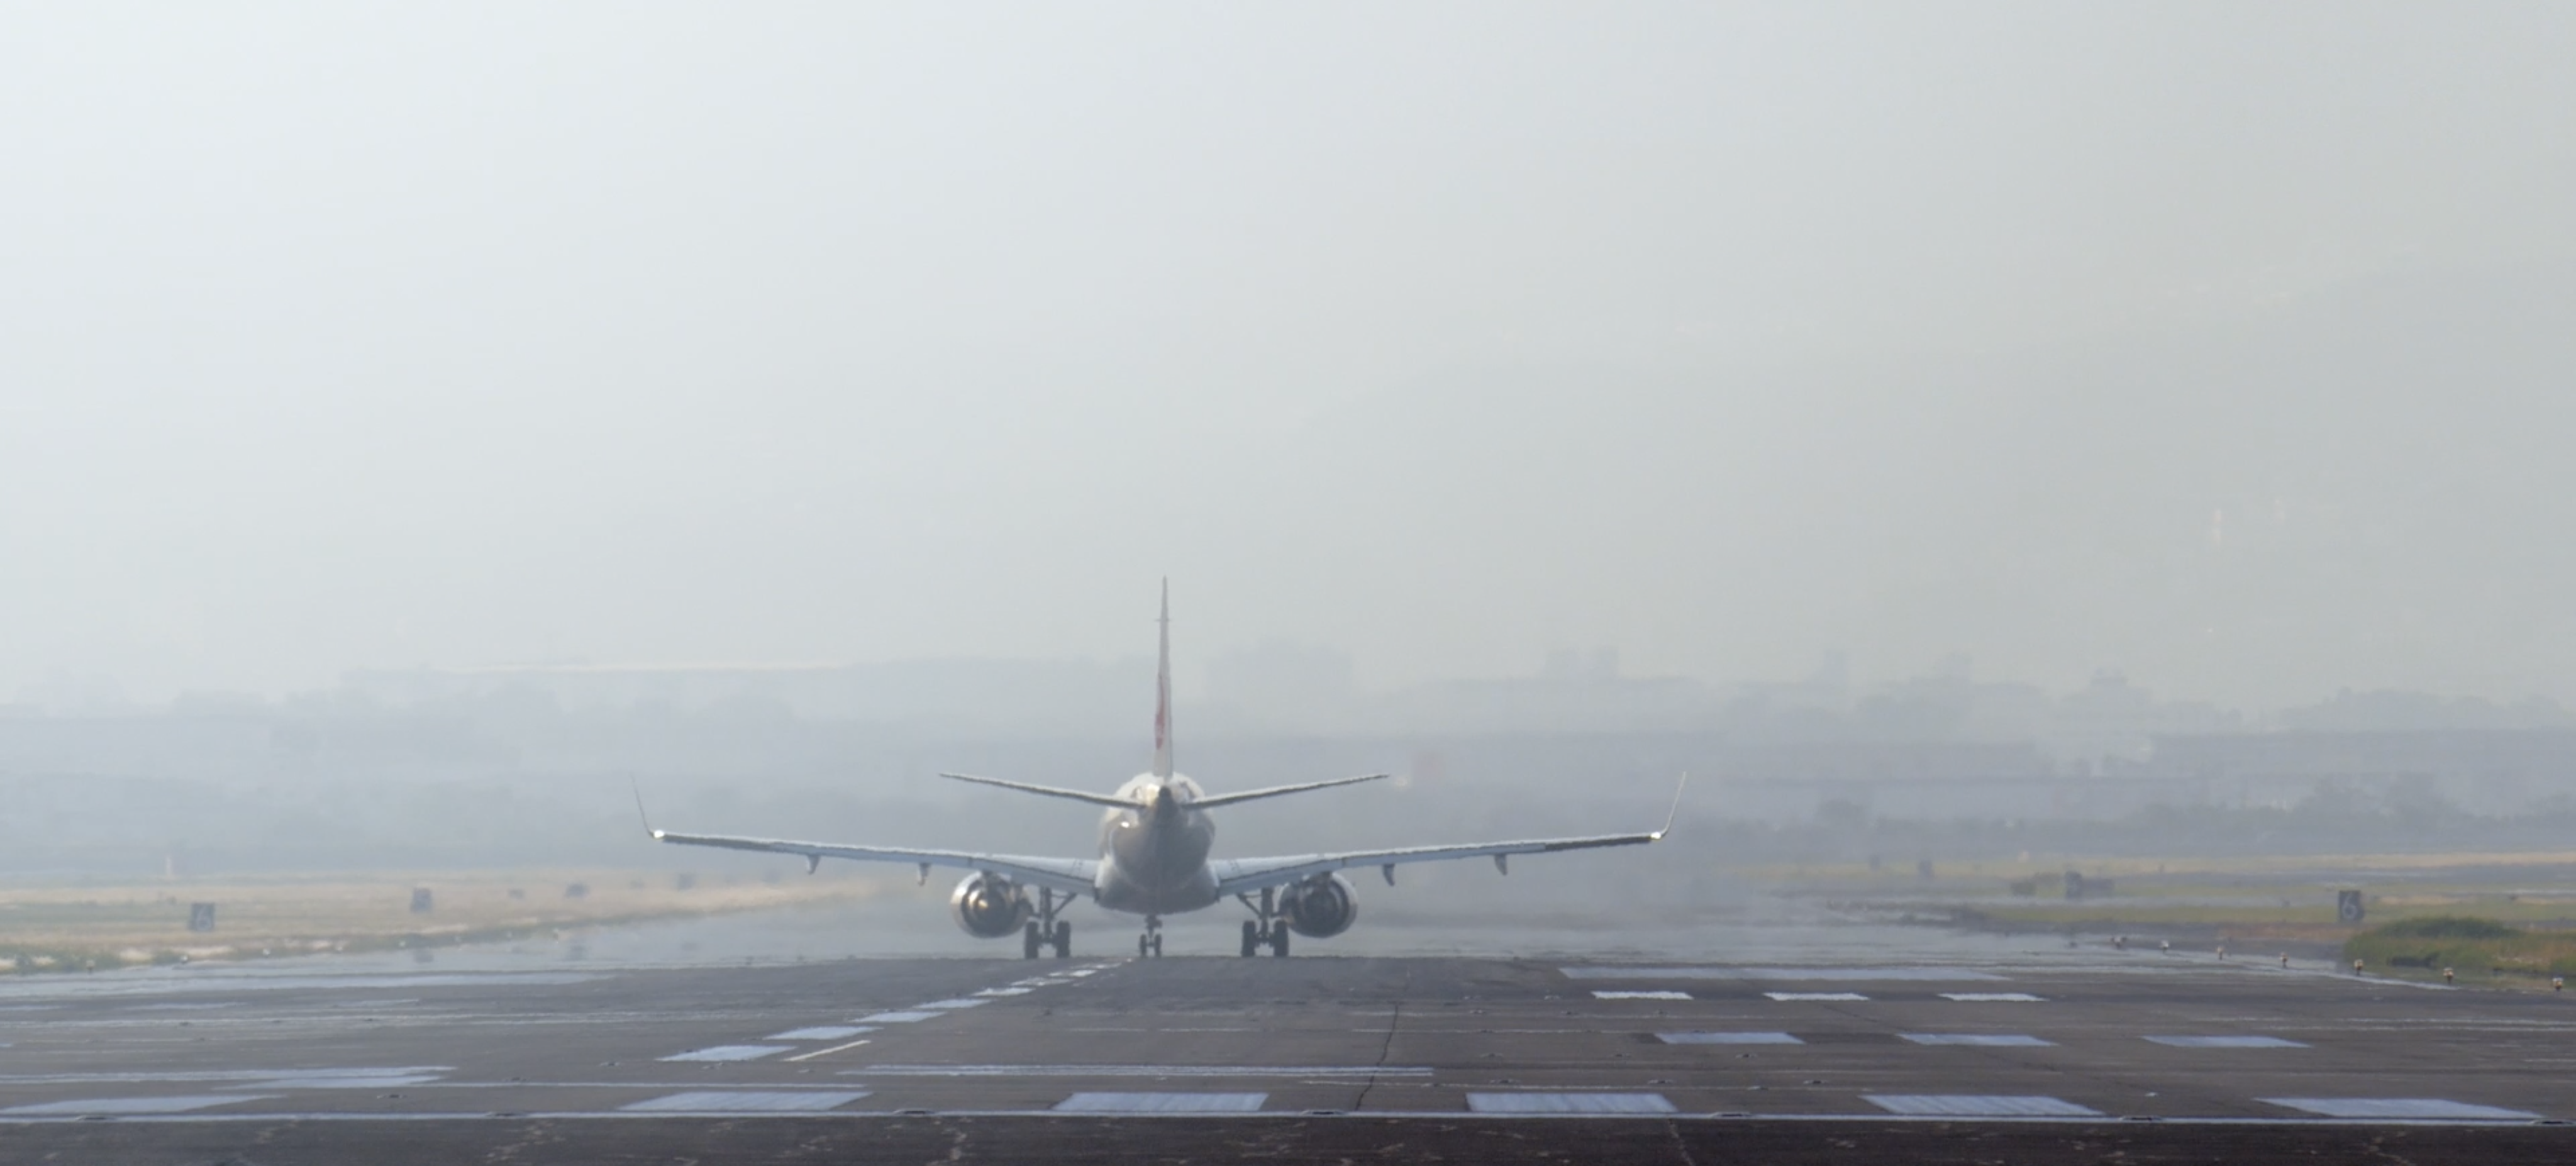 Infrastructure finance case study: Solidifying Hong Kong’s role as a global aviation hub